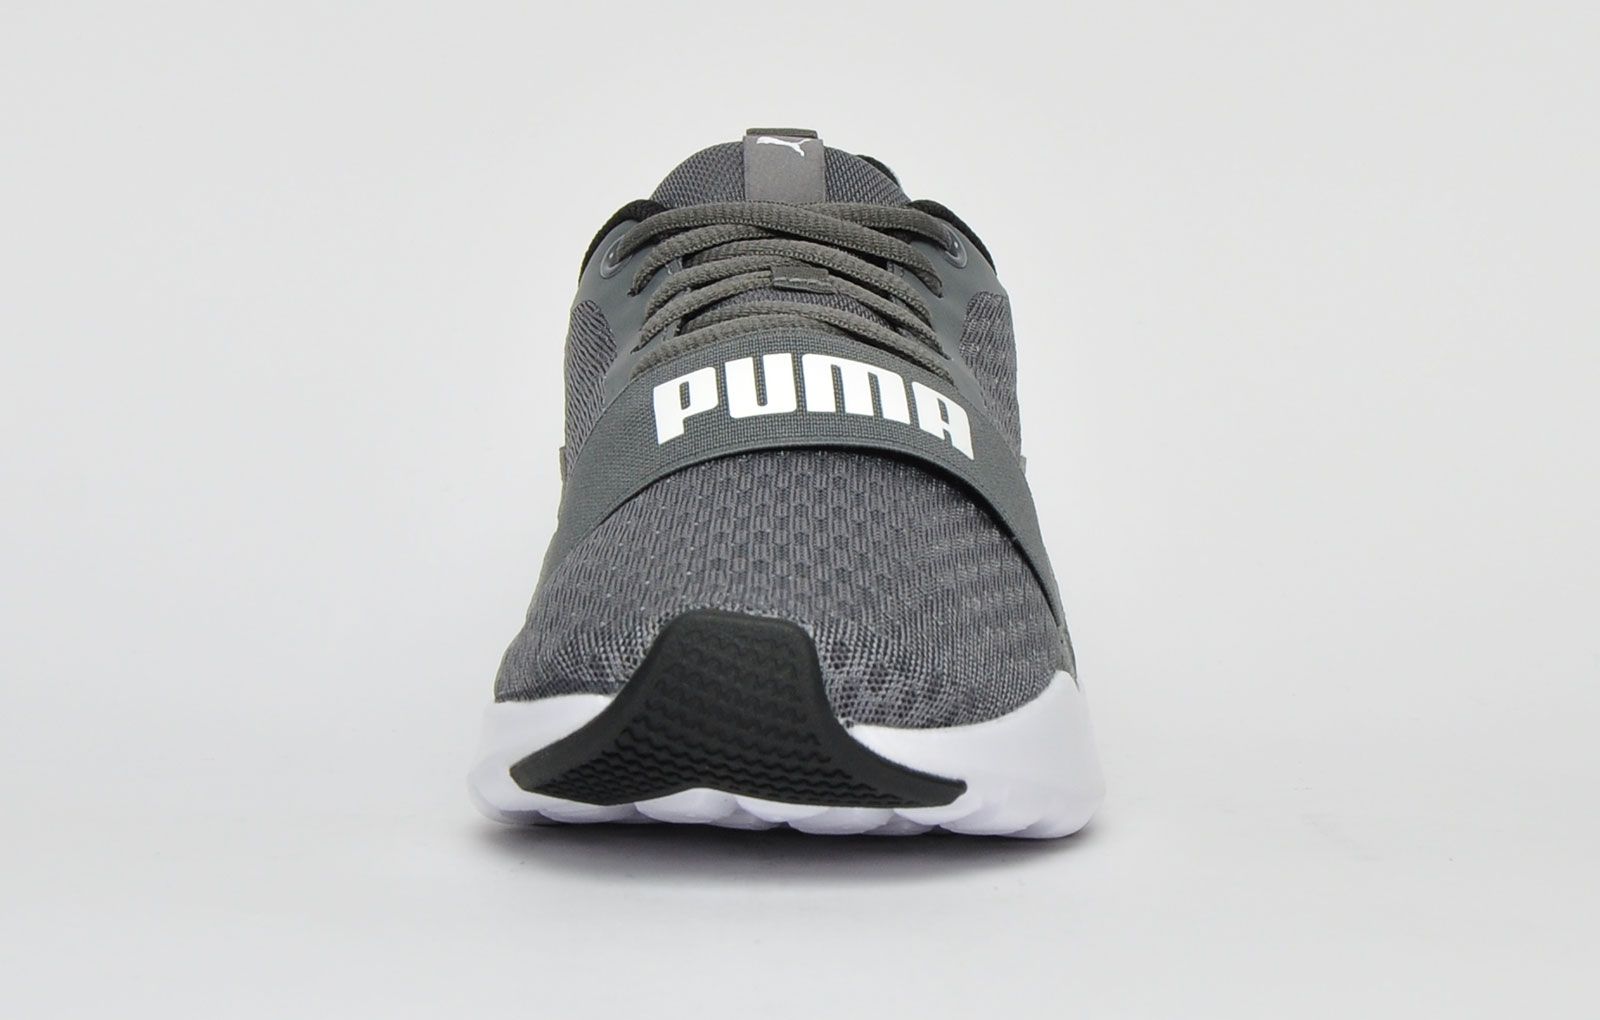 Designed for runners of all levels craving a relaxed silhouette that easily transitions from everyday wear to the rigours of road running, Puma have designed this athletic addition to the ultra-popular PUMA Wired family. <p>Featuring a breathable mesh upper and an advanced IMEVA midsole for superior comfort throughout your runs, workouts, or just general everyday wear. These Puma Wired Trainers deliver unparalleled performance and comfort for sporting enthusiasts seeking a trainer for multi-functional wear</p> <p>- Lightweight breathable textile mesh upper </p> <p>- Elasticated strap secures foot in place</p> <p>- Secure lace up closure </p> <p>- Puma IMEVA midsole offers support and comfort </p> <p>- Puma Softfoam + insole for sumptuous fatigue free wear</p> <p>- Puma branding throughout</p>